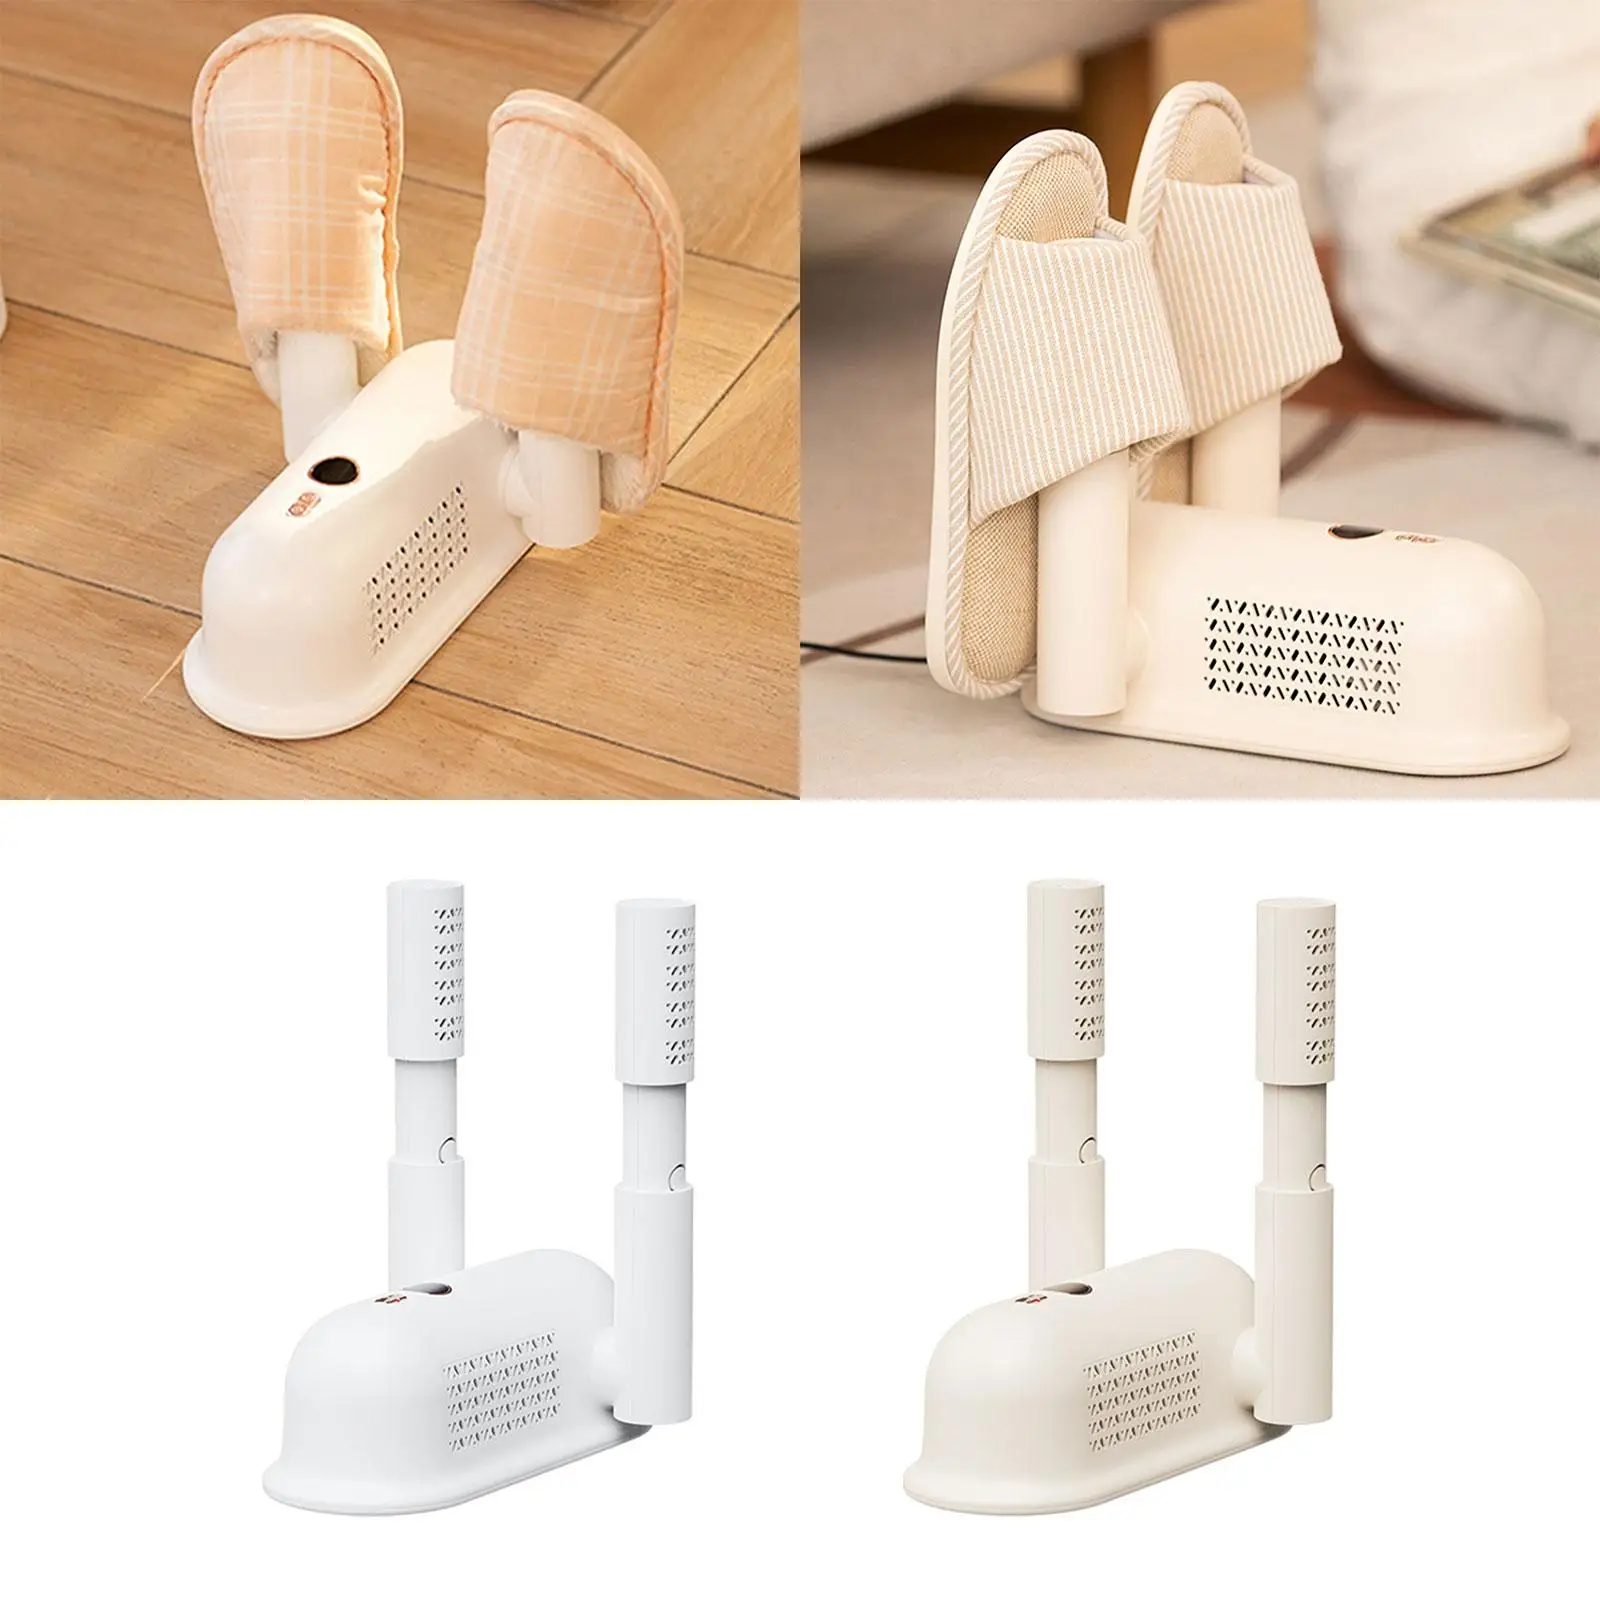 Household Shoe Dryer with Timer Portable Footwears Heater Electric Boot Warmer Glove Dryer for Winter Shoes Office Hotel Travel